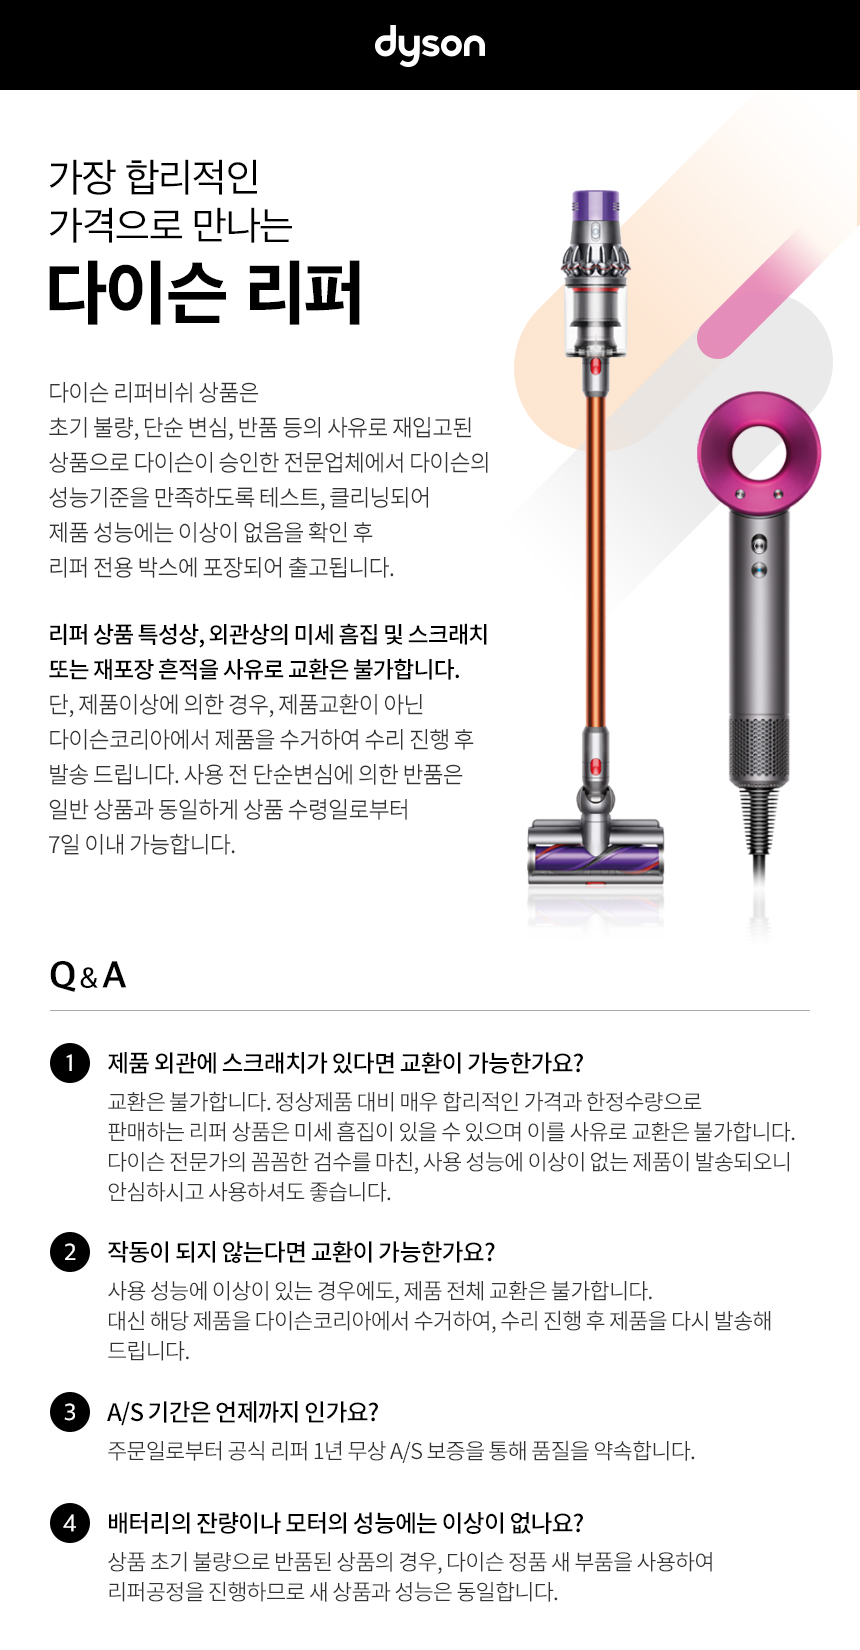 Dyson Refurbished Product